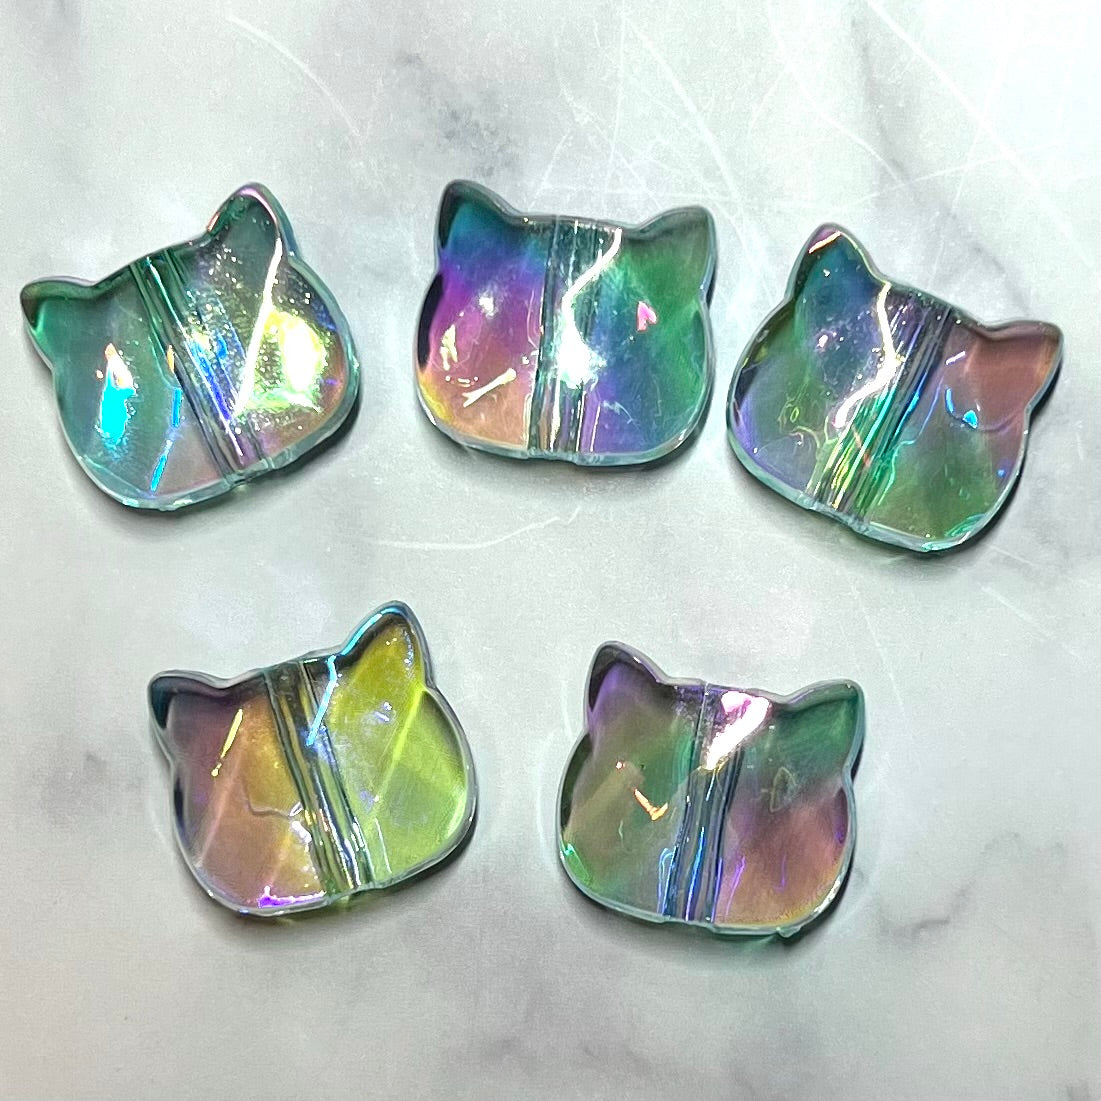 21mm x 19mm Cat Head Beads in Transparent Pale Green Color for Jewelry & Pens | Iridescent Acrylic | QTY: 10 Cat Beads